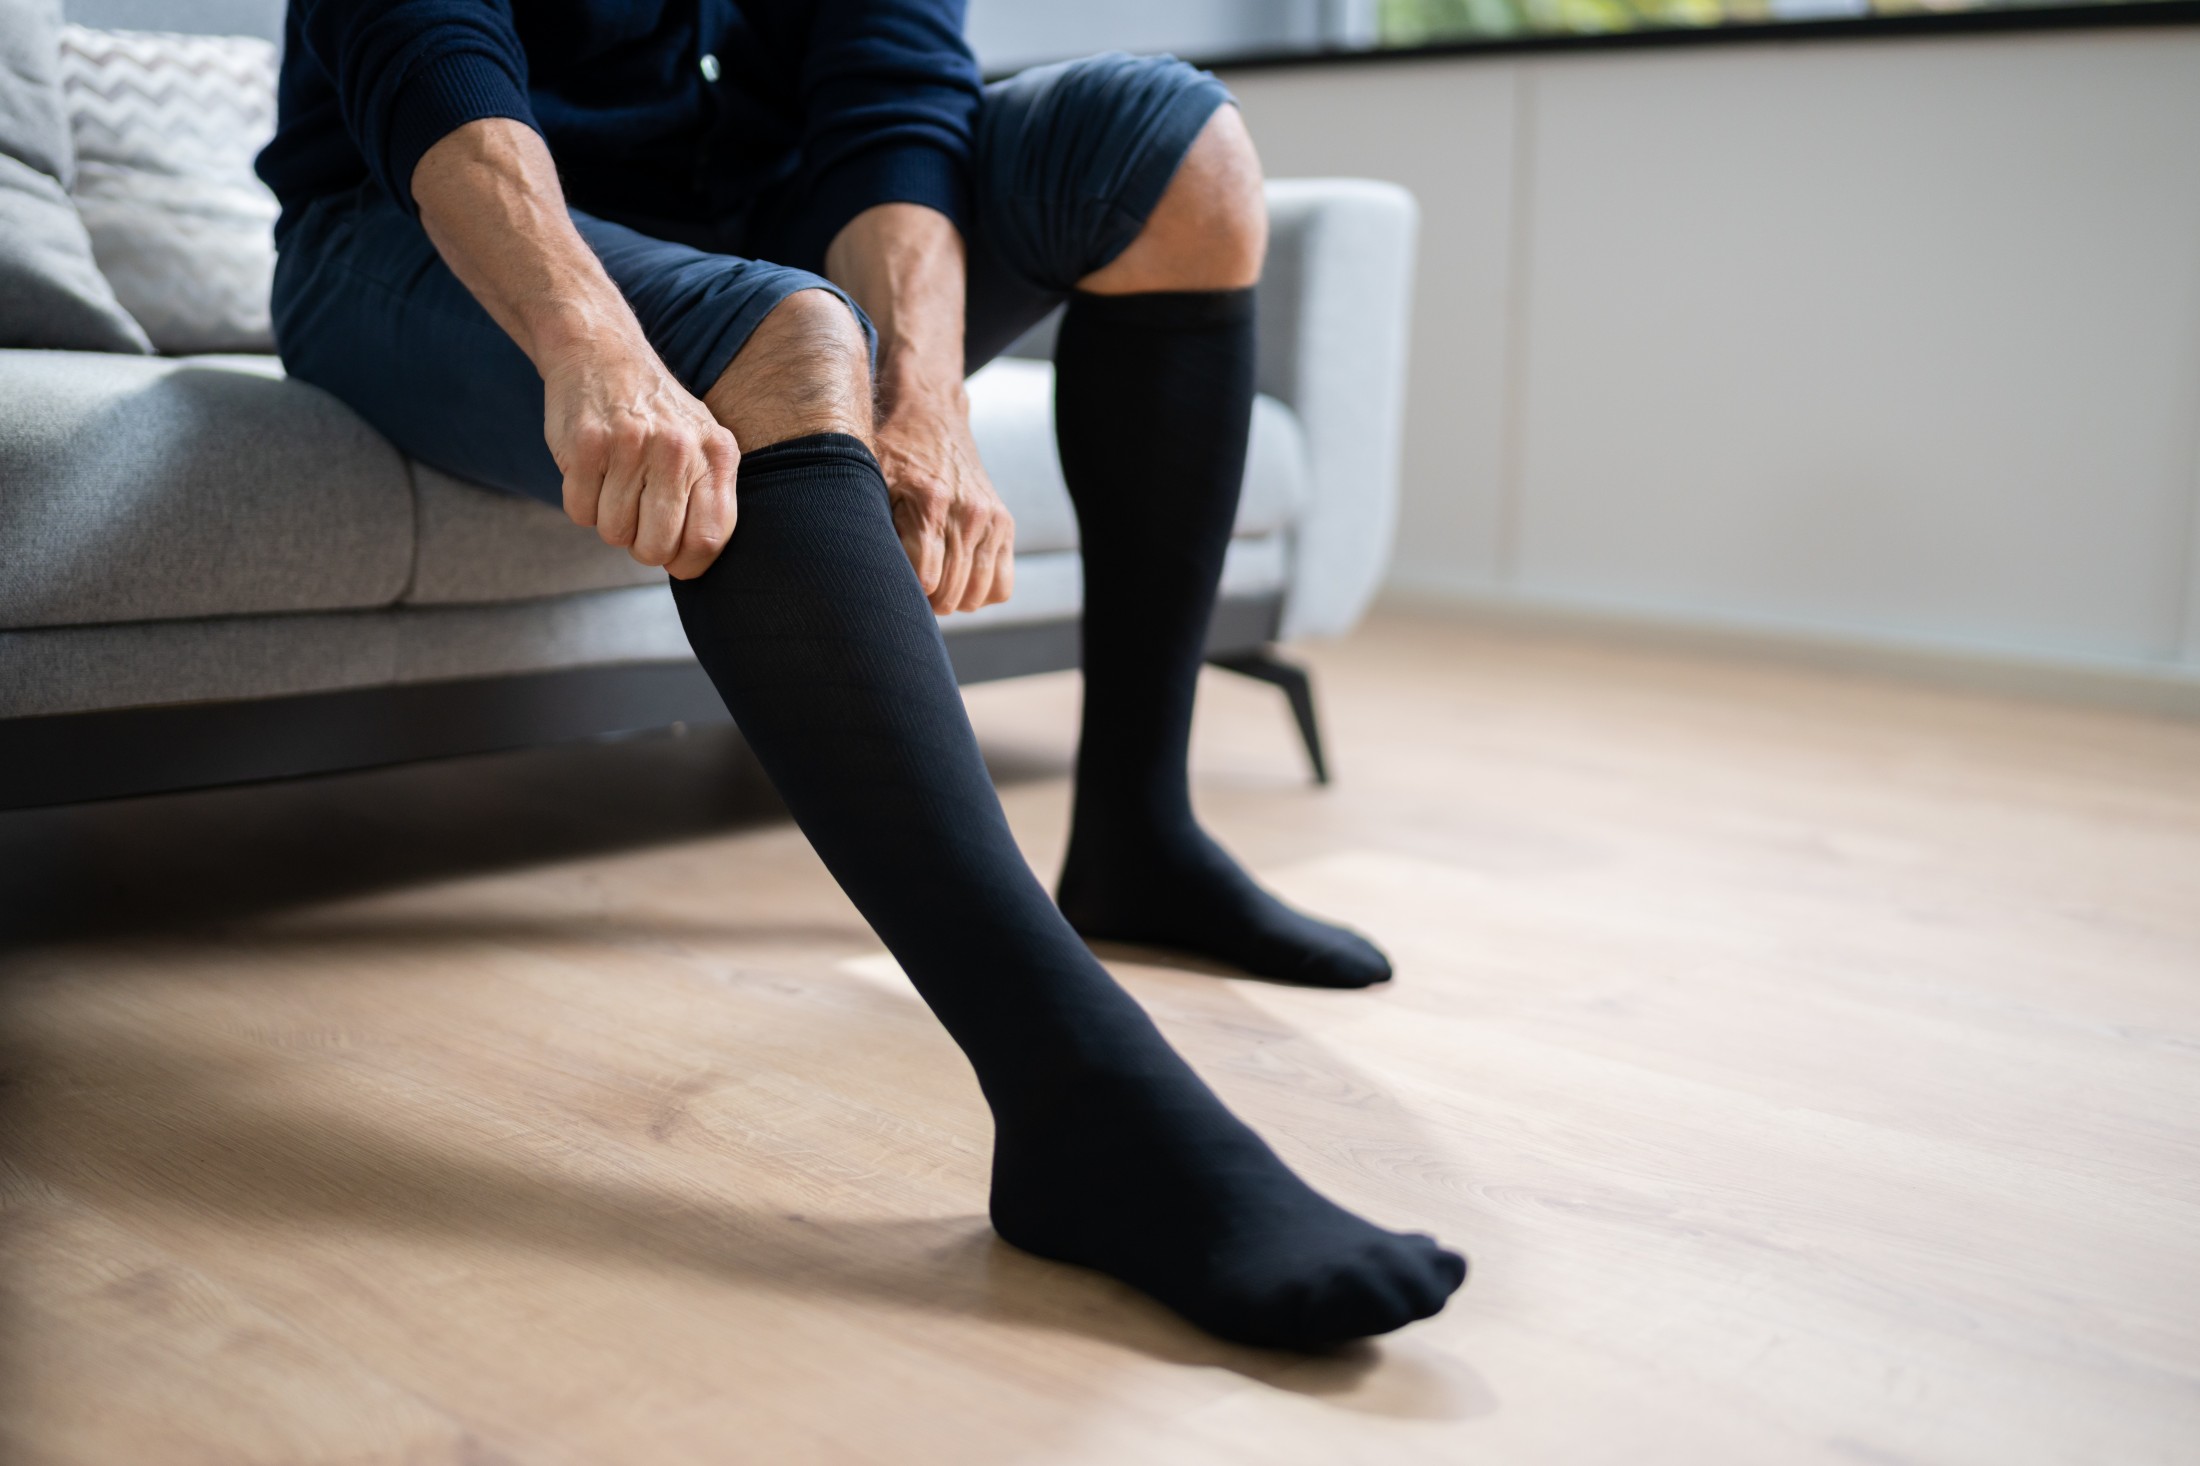 What are compression socks and do they really help?